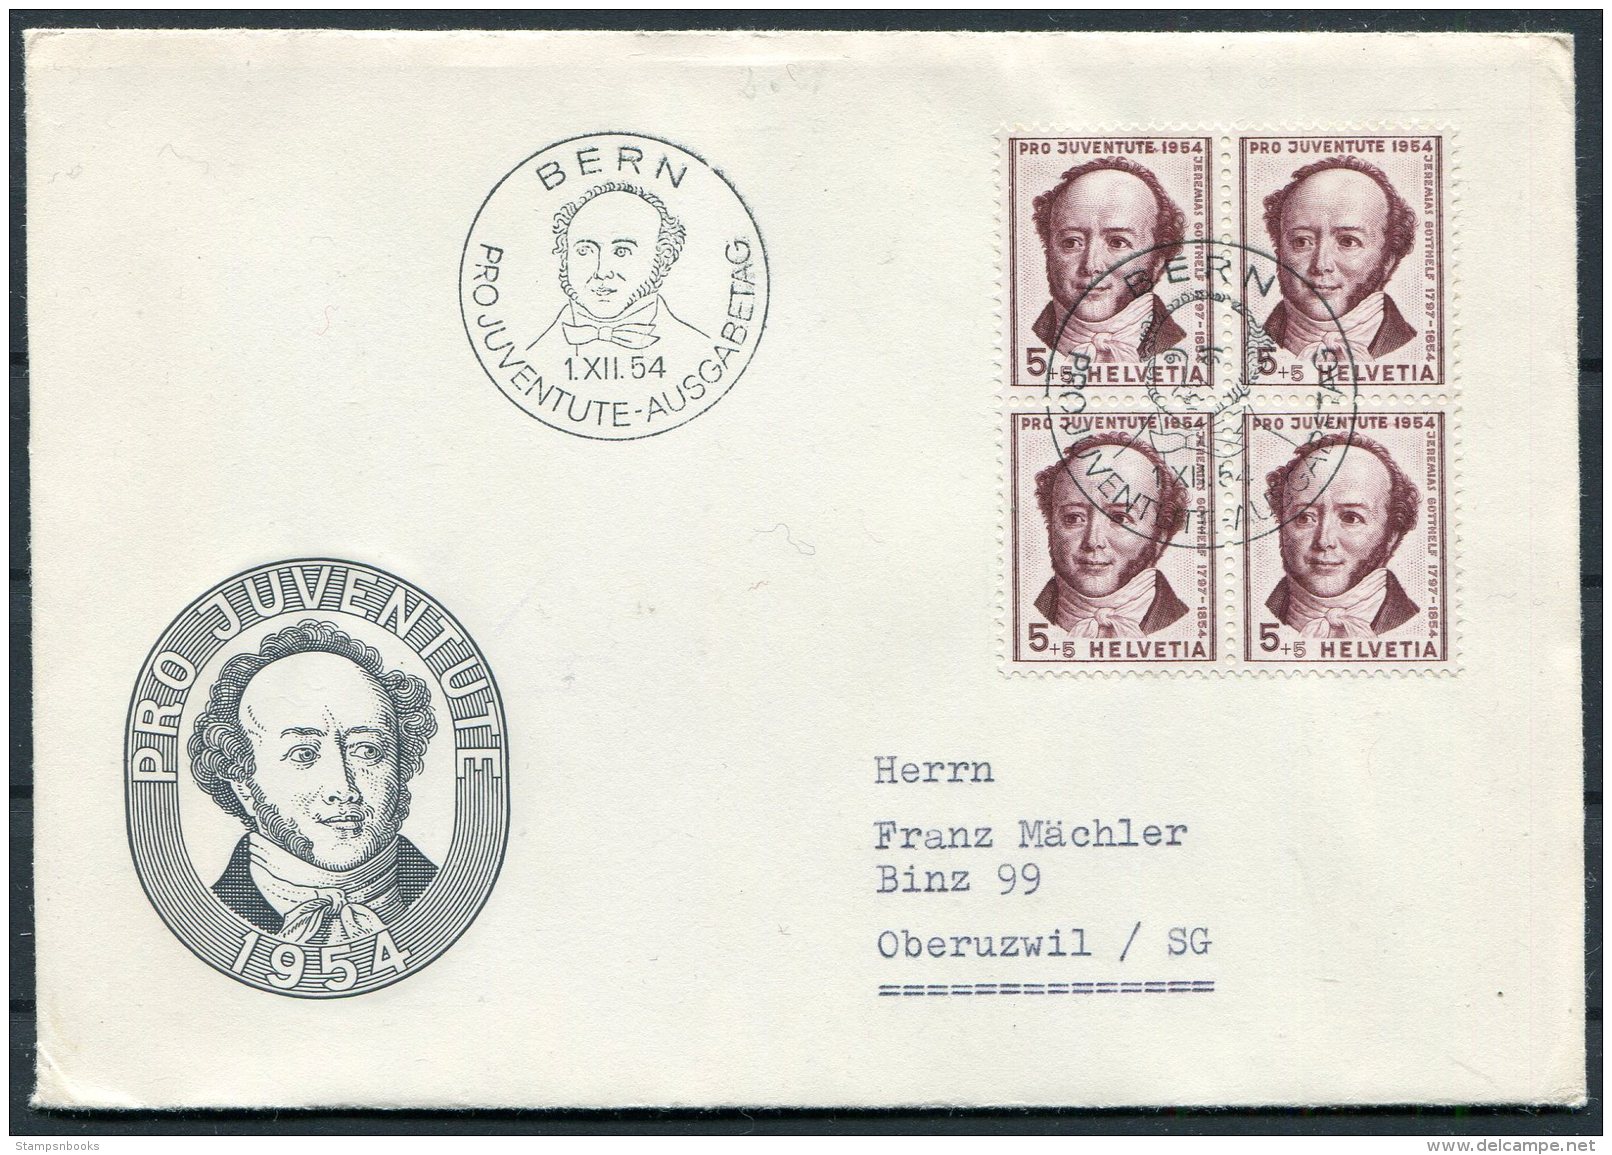 1954 Switzerland Pro Juventute Bern First Day Cover - FDC